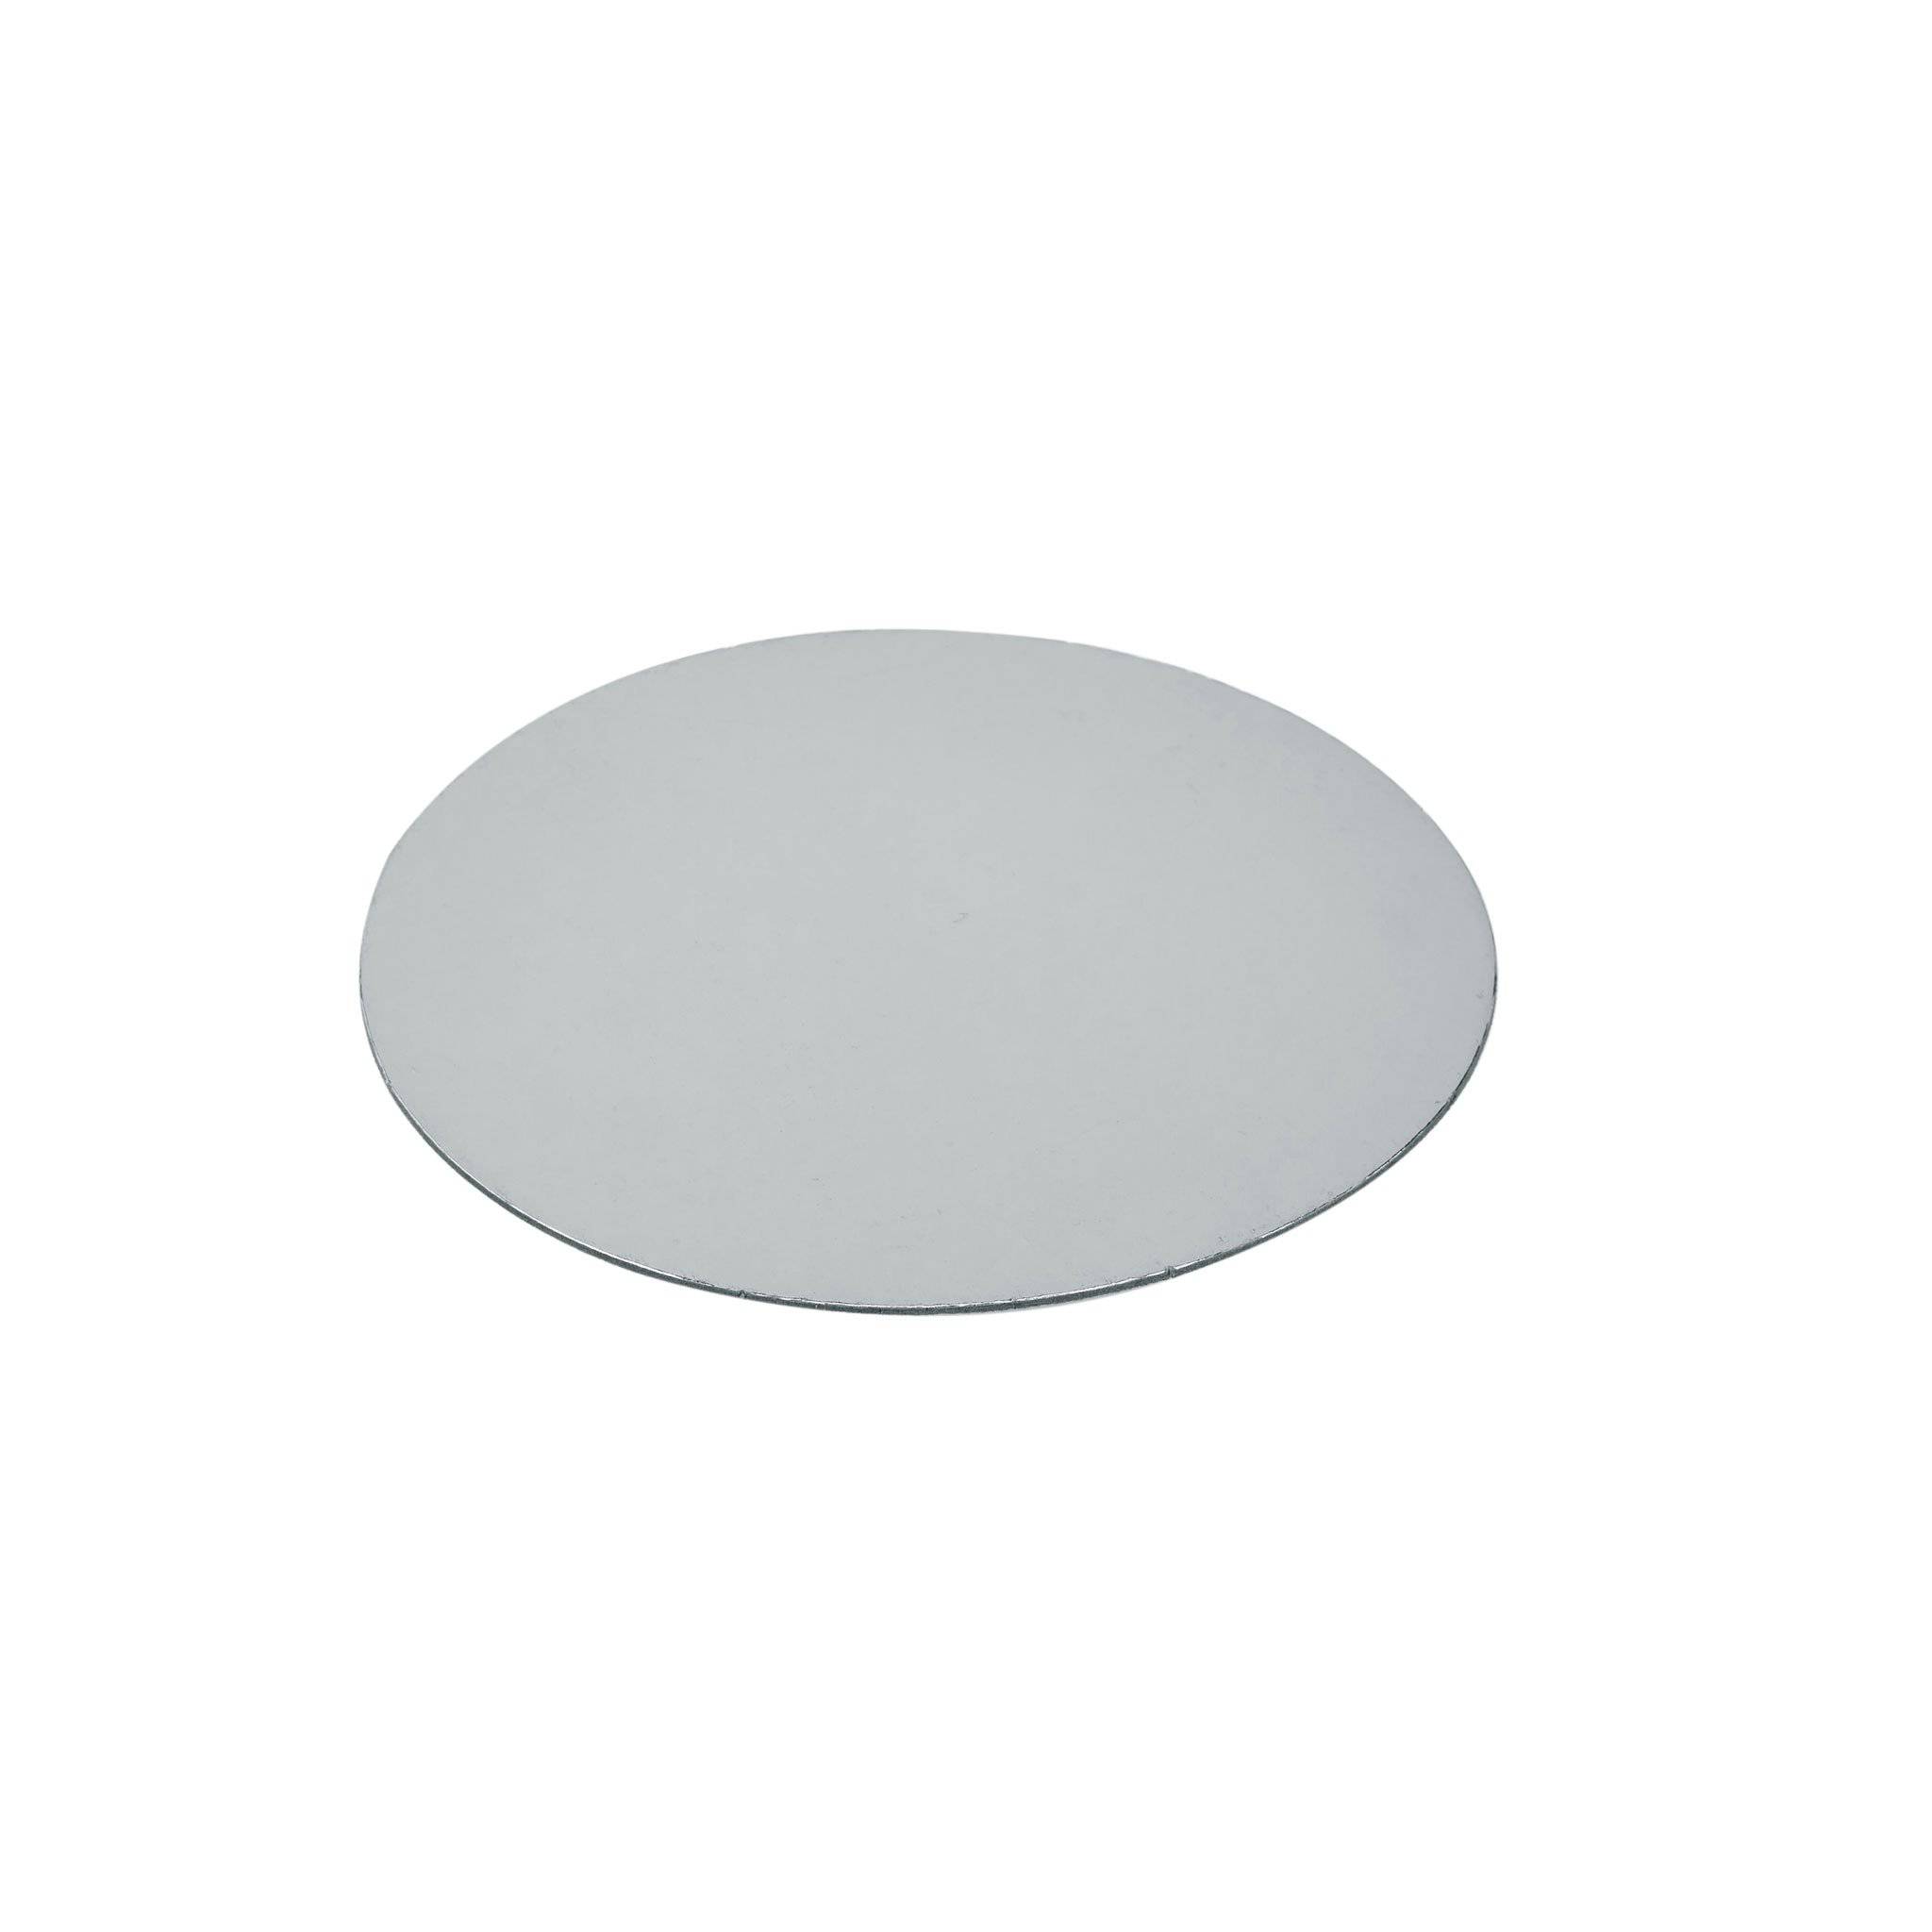 ROUND CAKE BOARD SILVER  50 Pieces - Hotpack Global